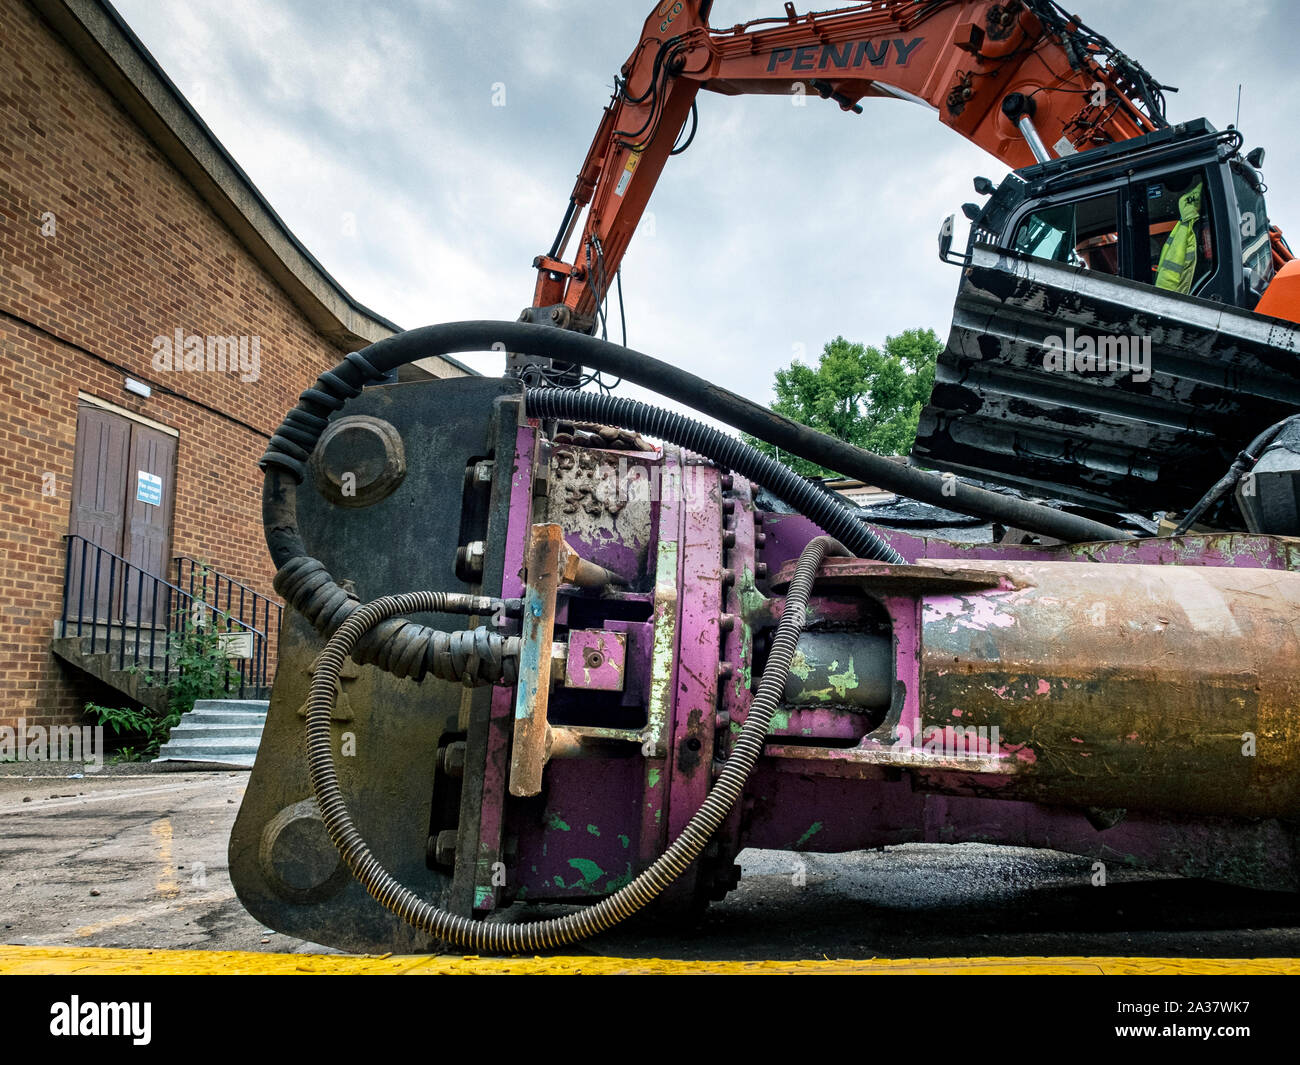 The demolition of an old building using heavy duty industrial machinery. Stock Photo